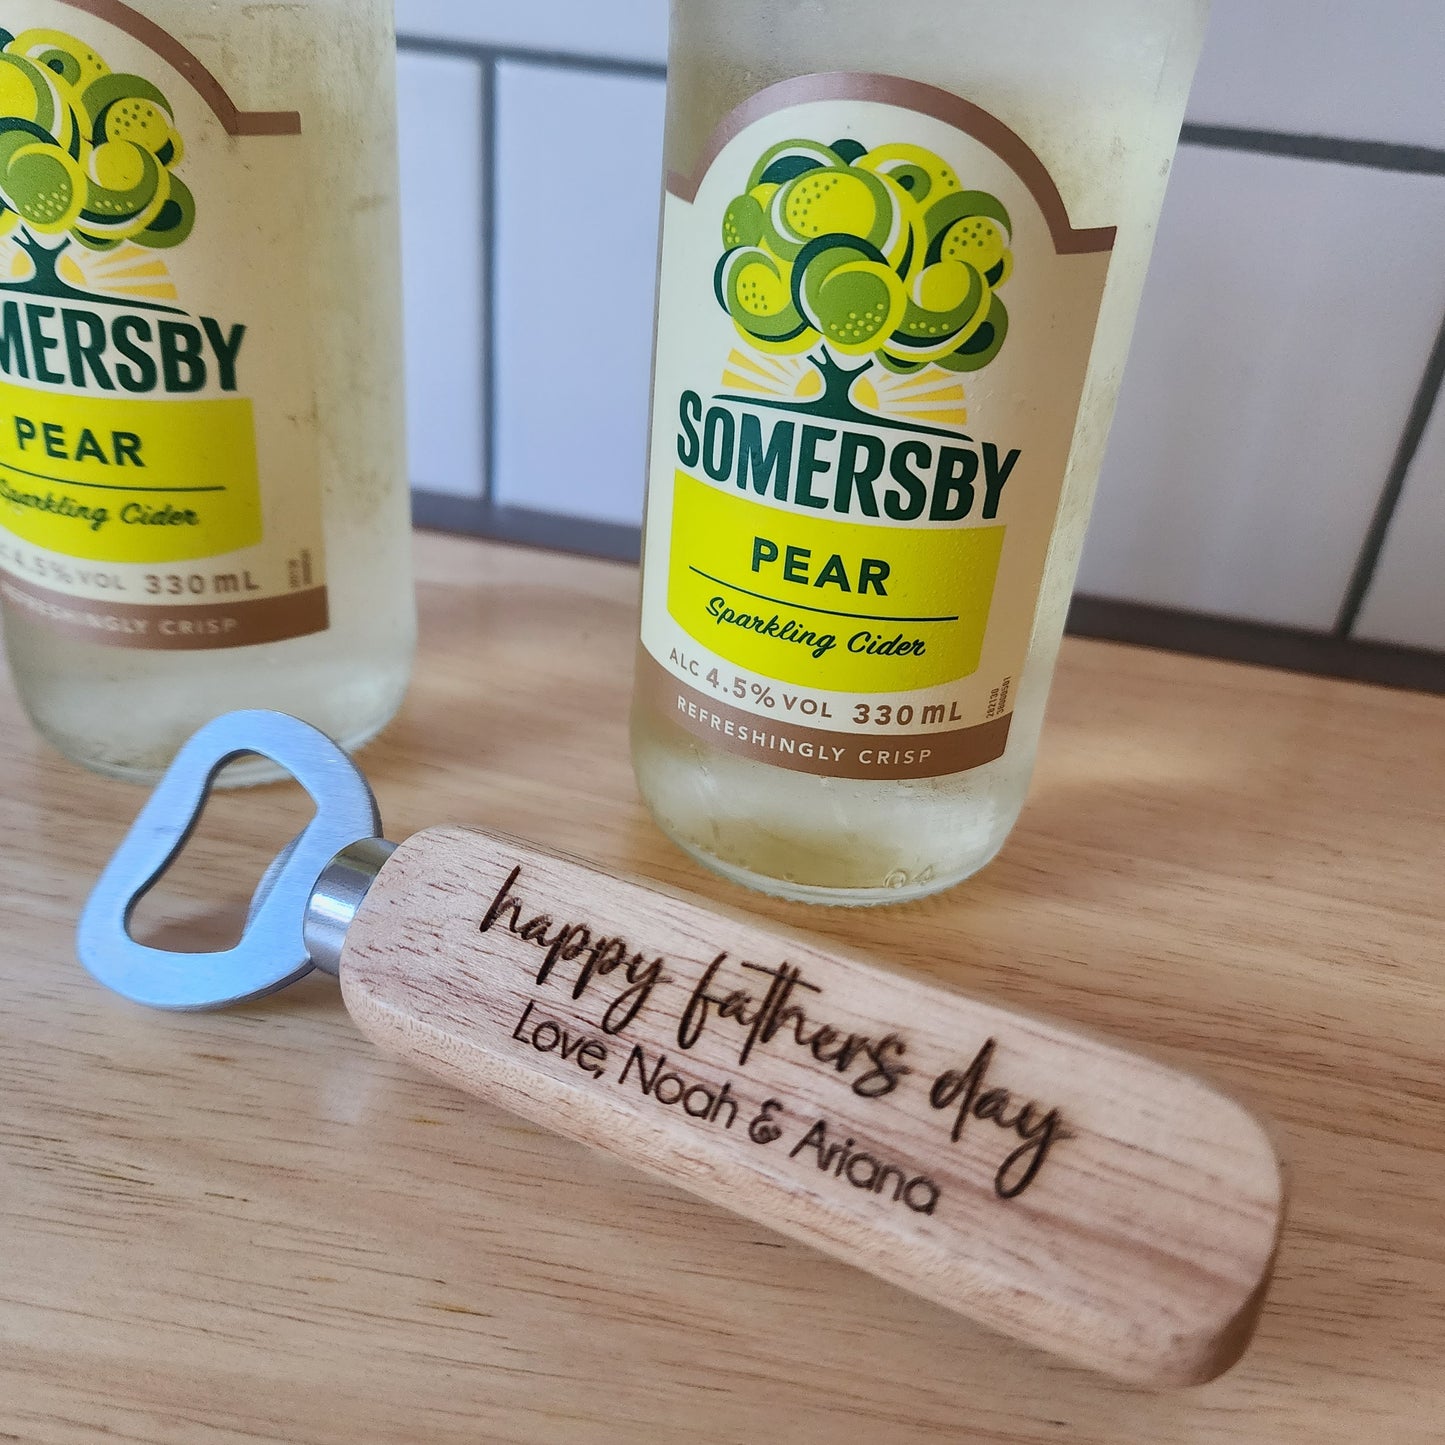 Bottle Opener 'Happy Father's Day'